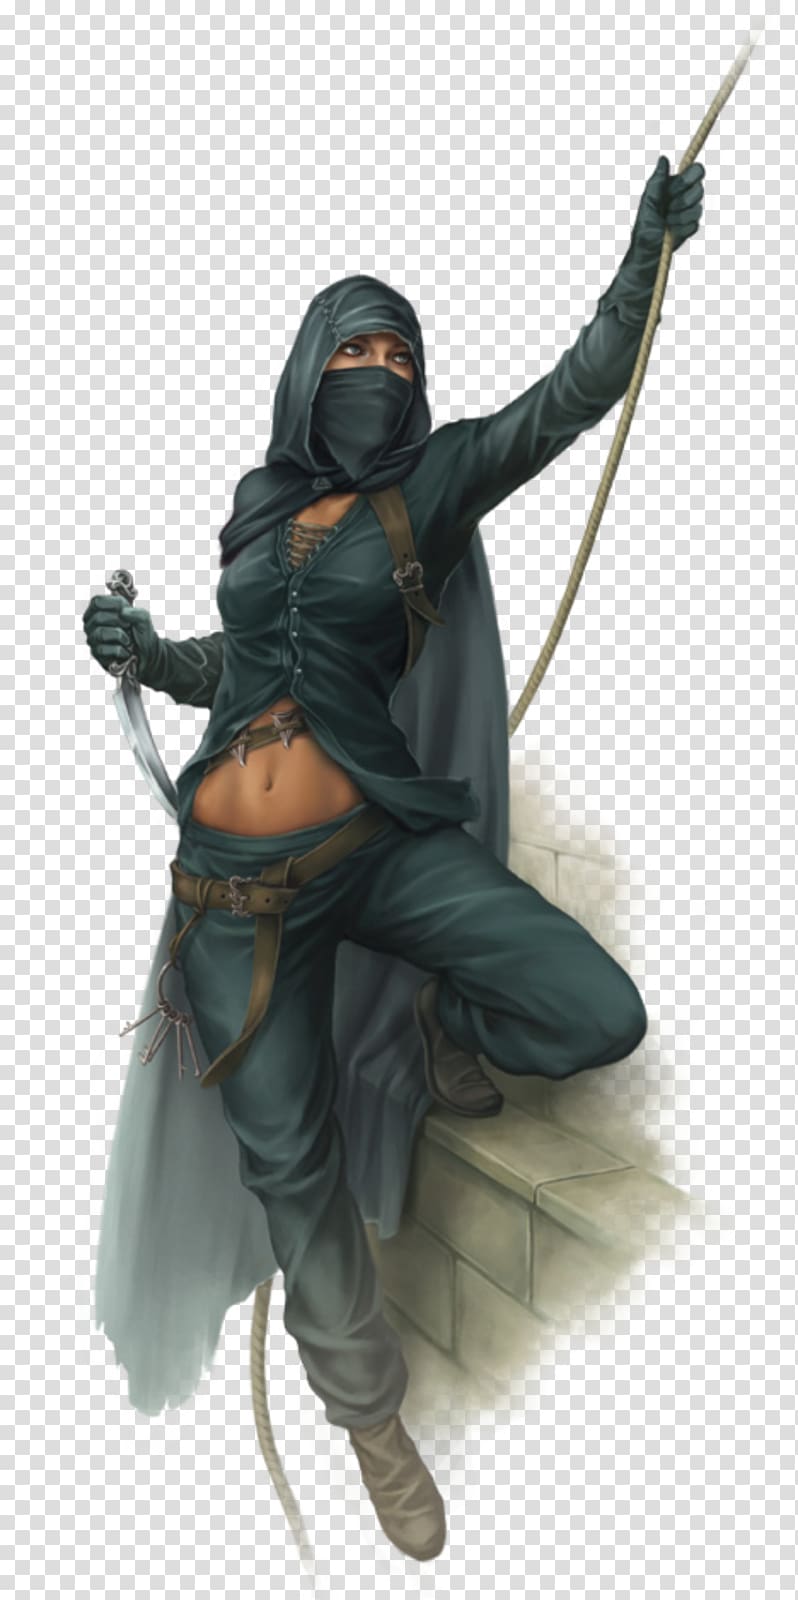 The Dark Eye Pin Dungeons & Dragons Fantasy Clothing, cloak transparent background PNG clipart